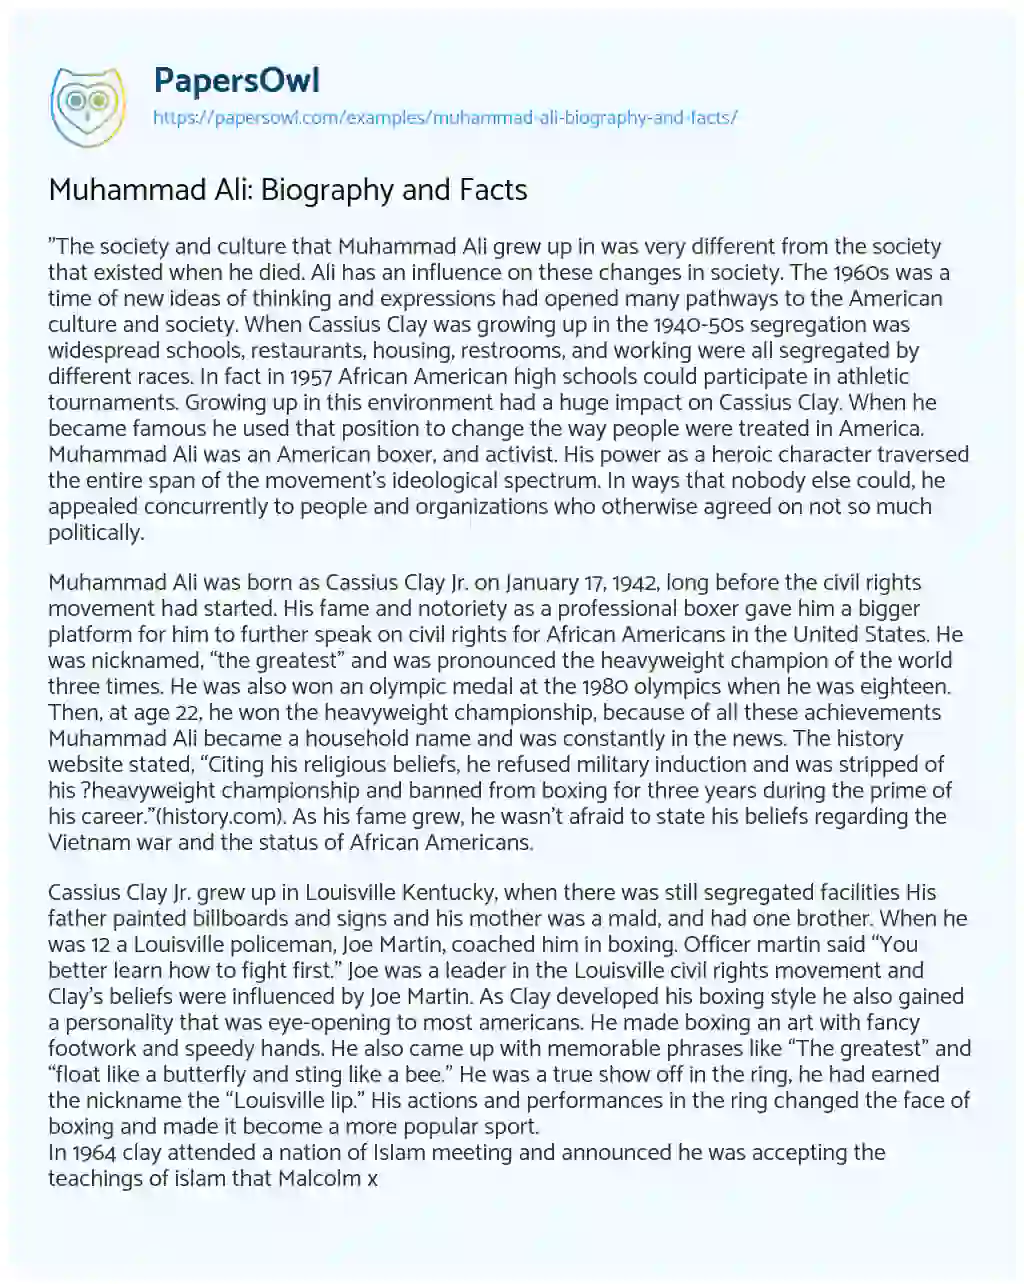 Essay on Muhammad Ali: Biography and Facts